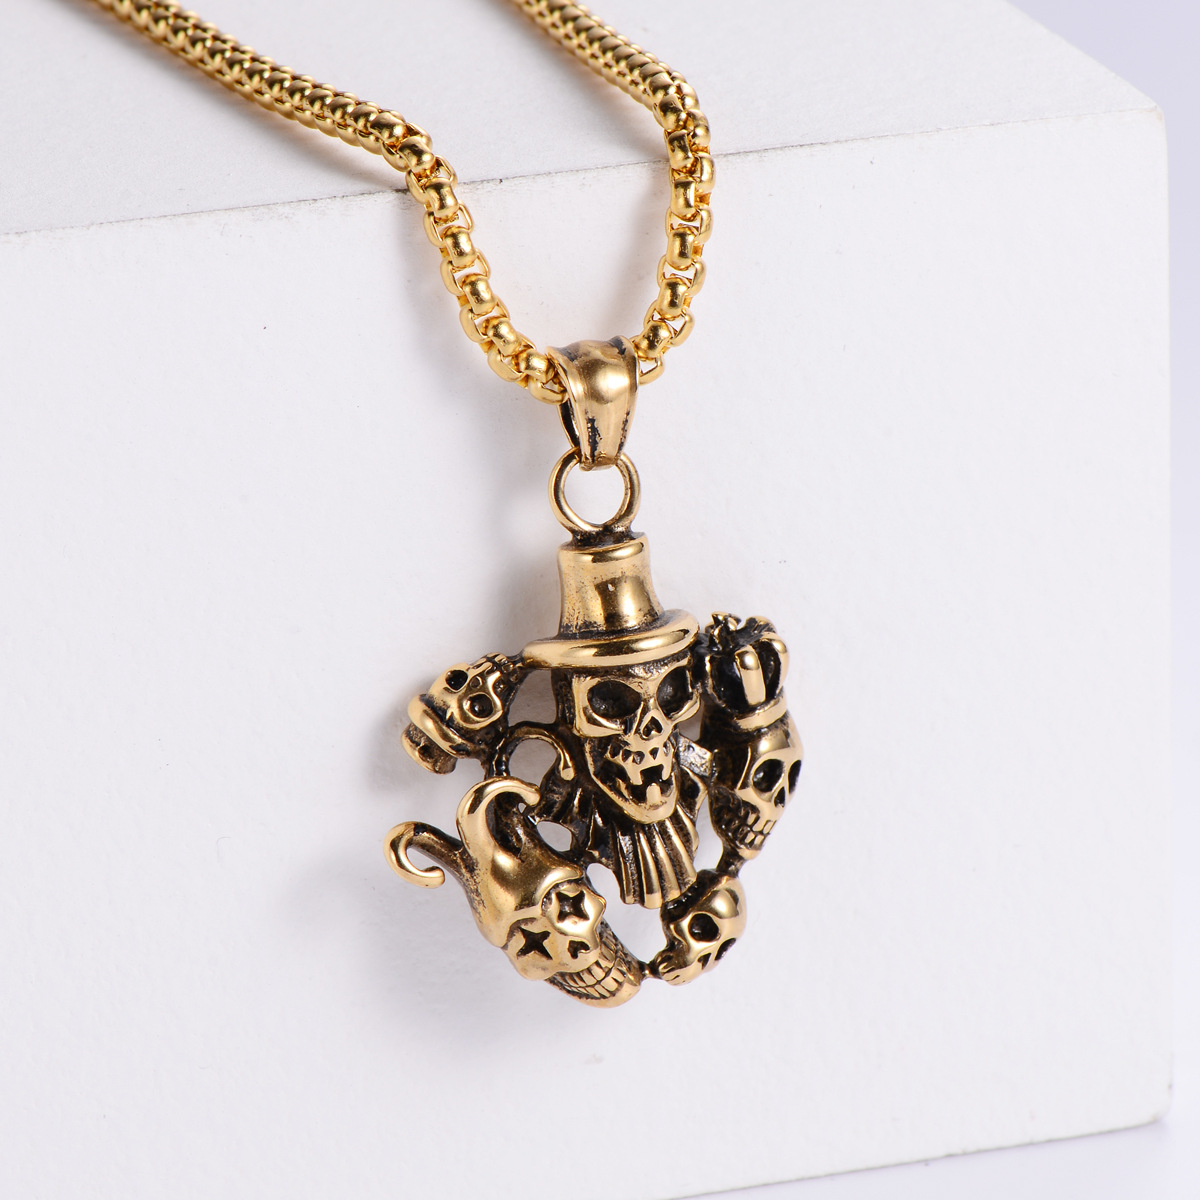 4:【Gold】with chain pendant